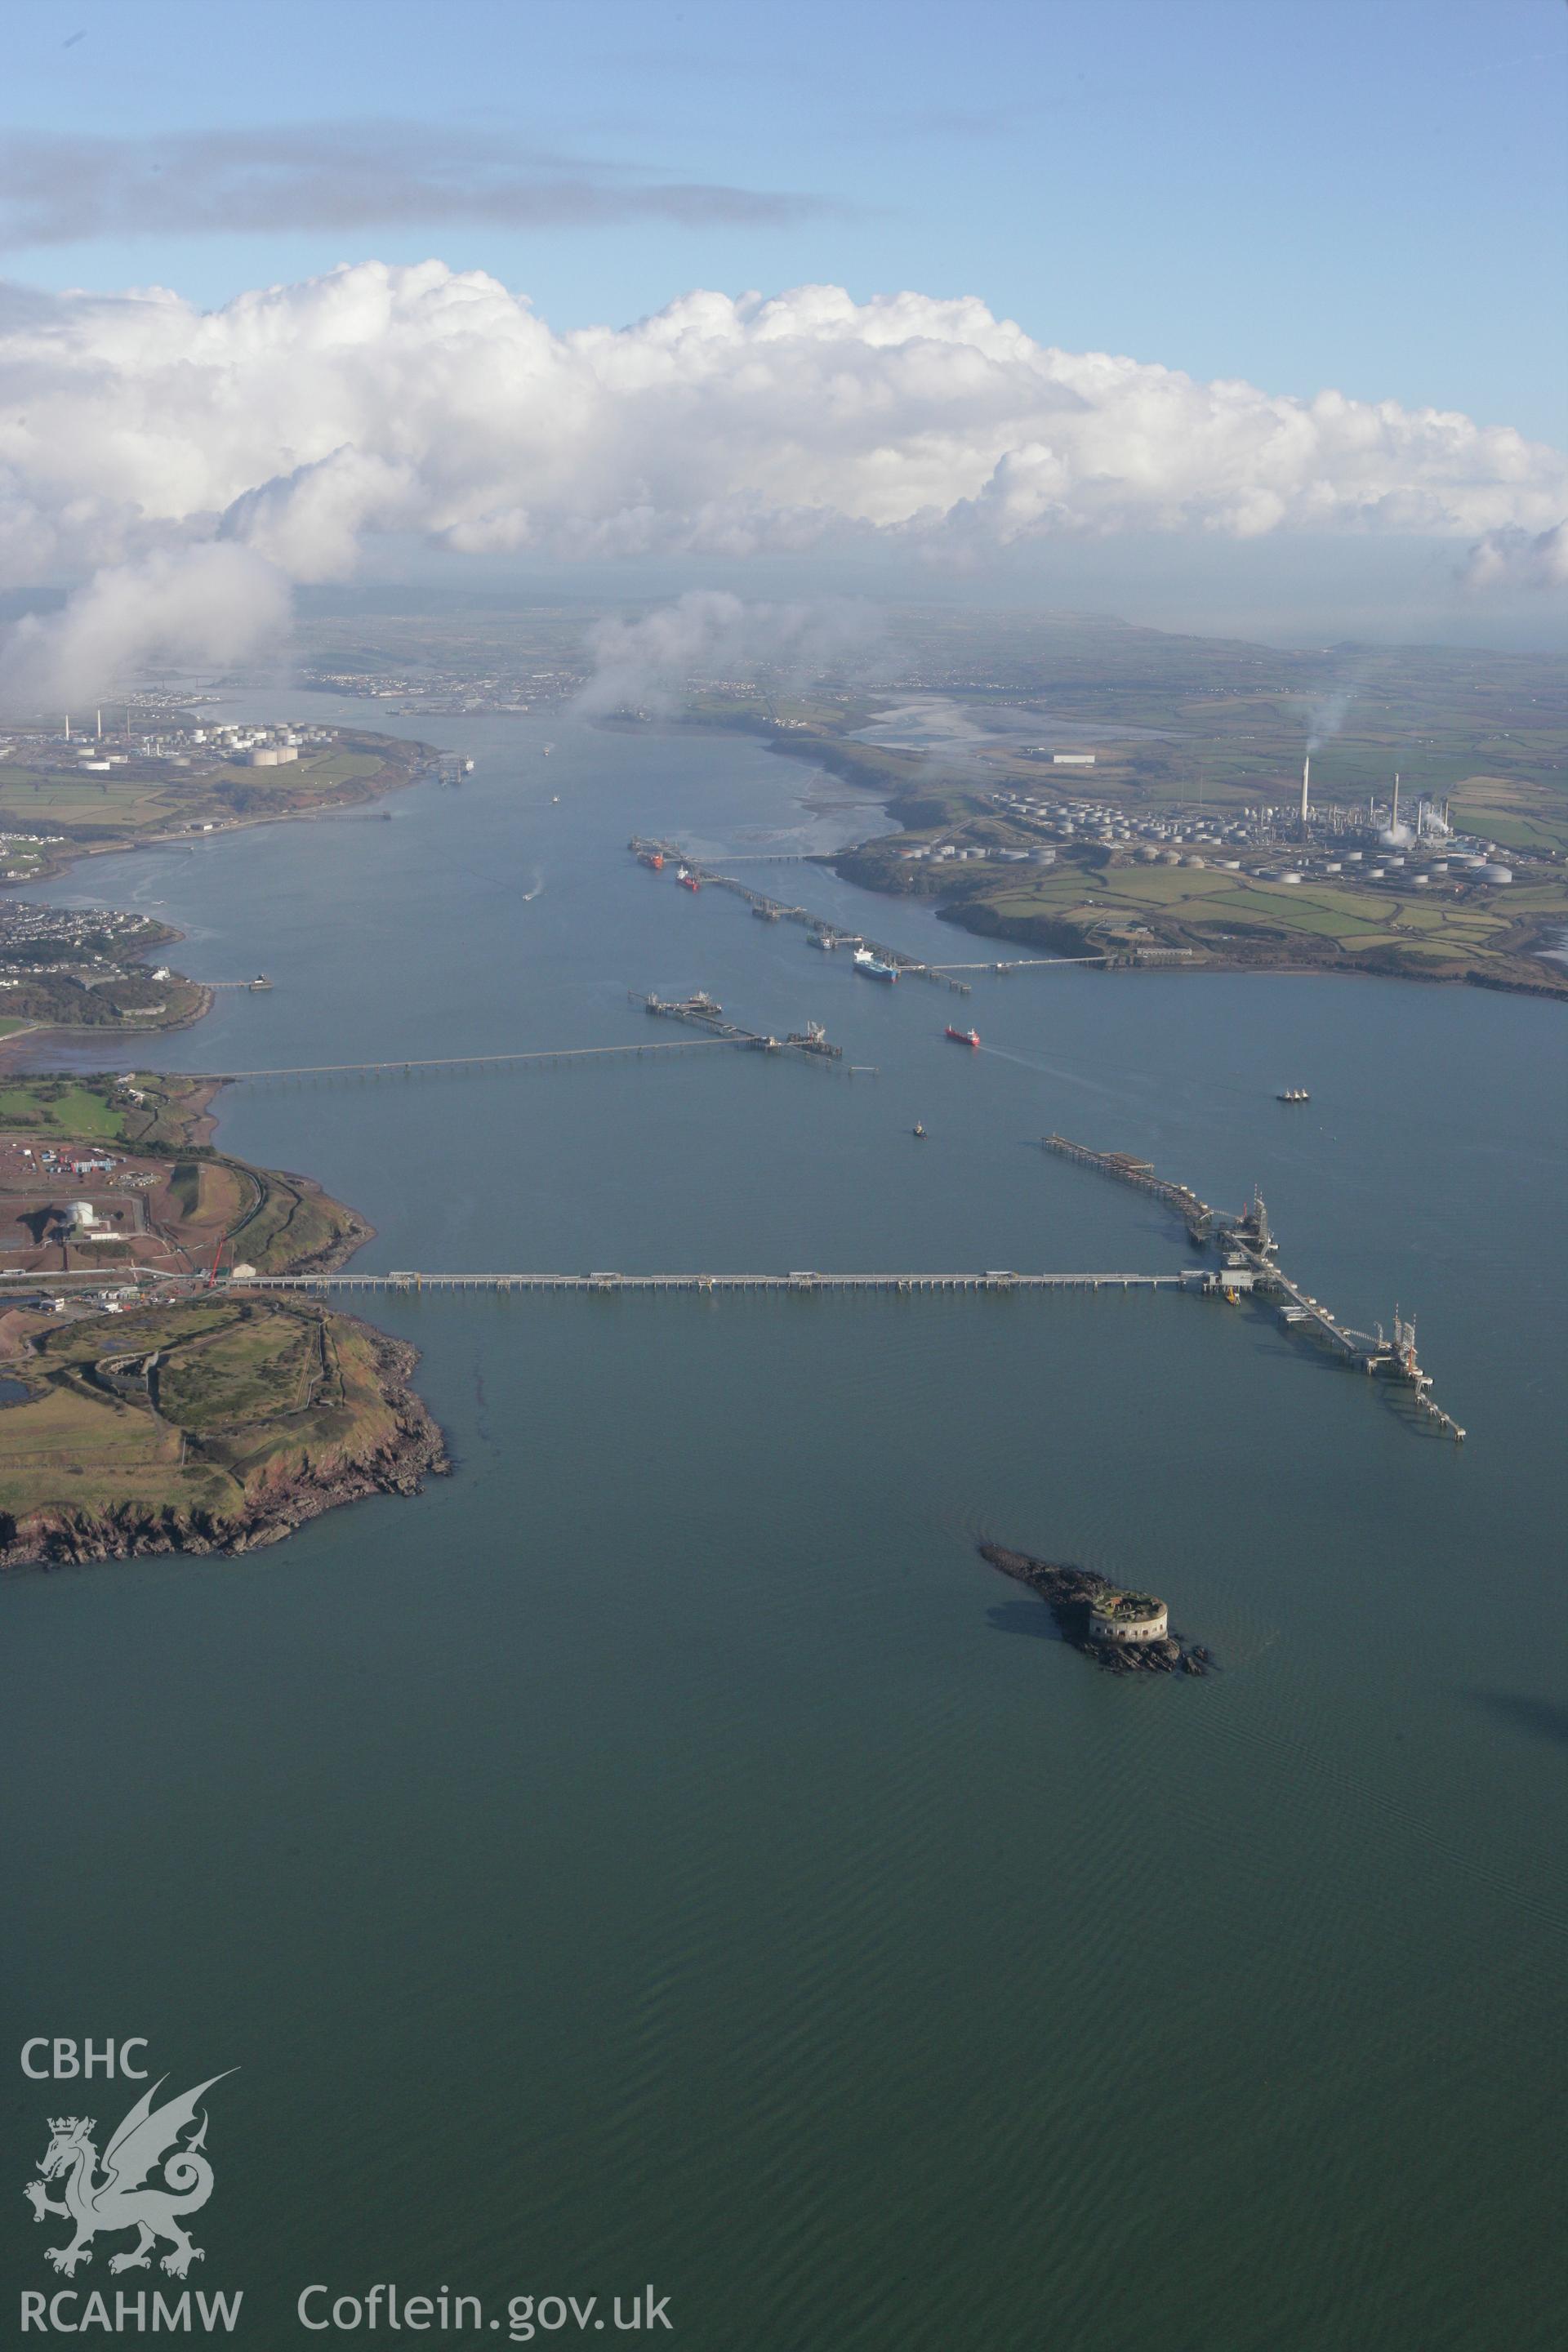 RCAHMW colour oblique photograph of Milford Haven waterway. Taken by Toby Driver on 11/02/2009.